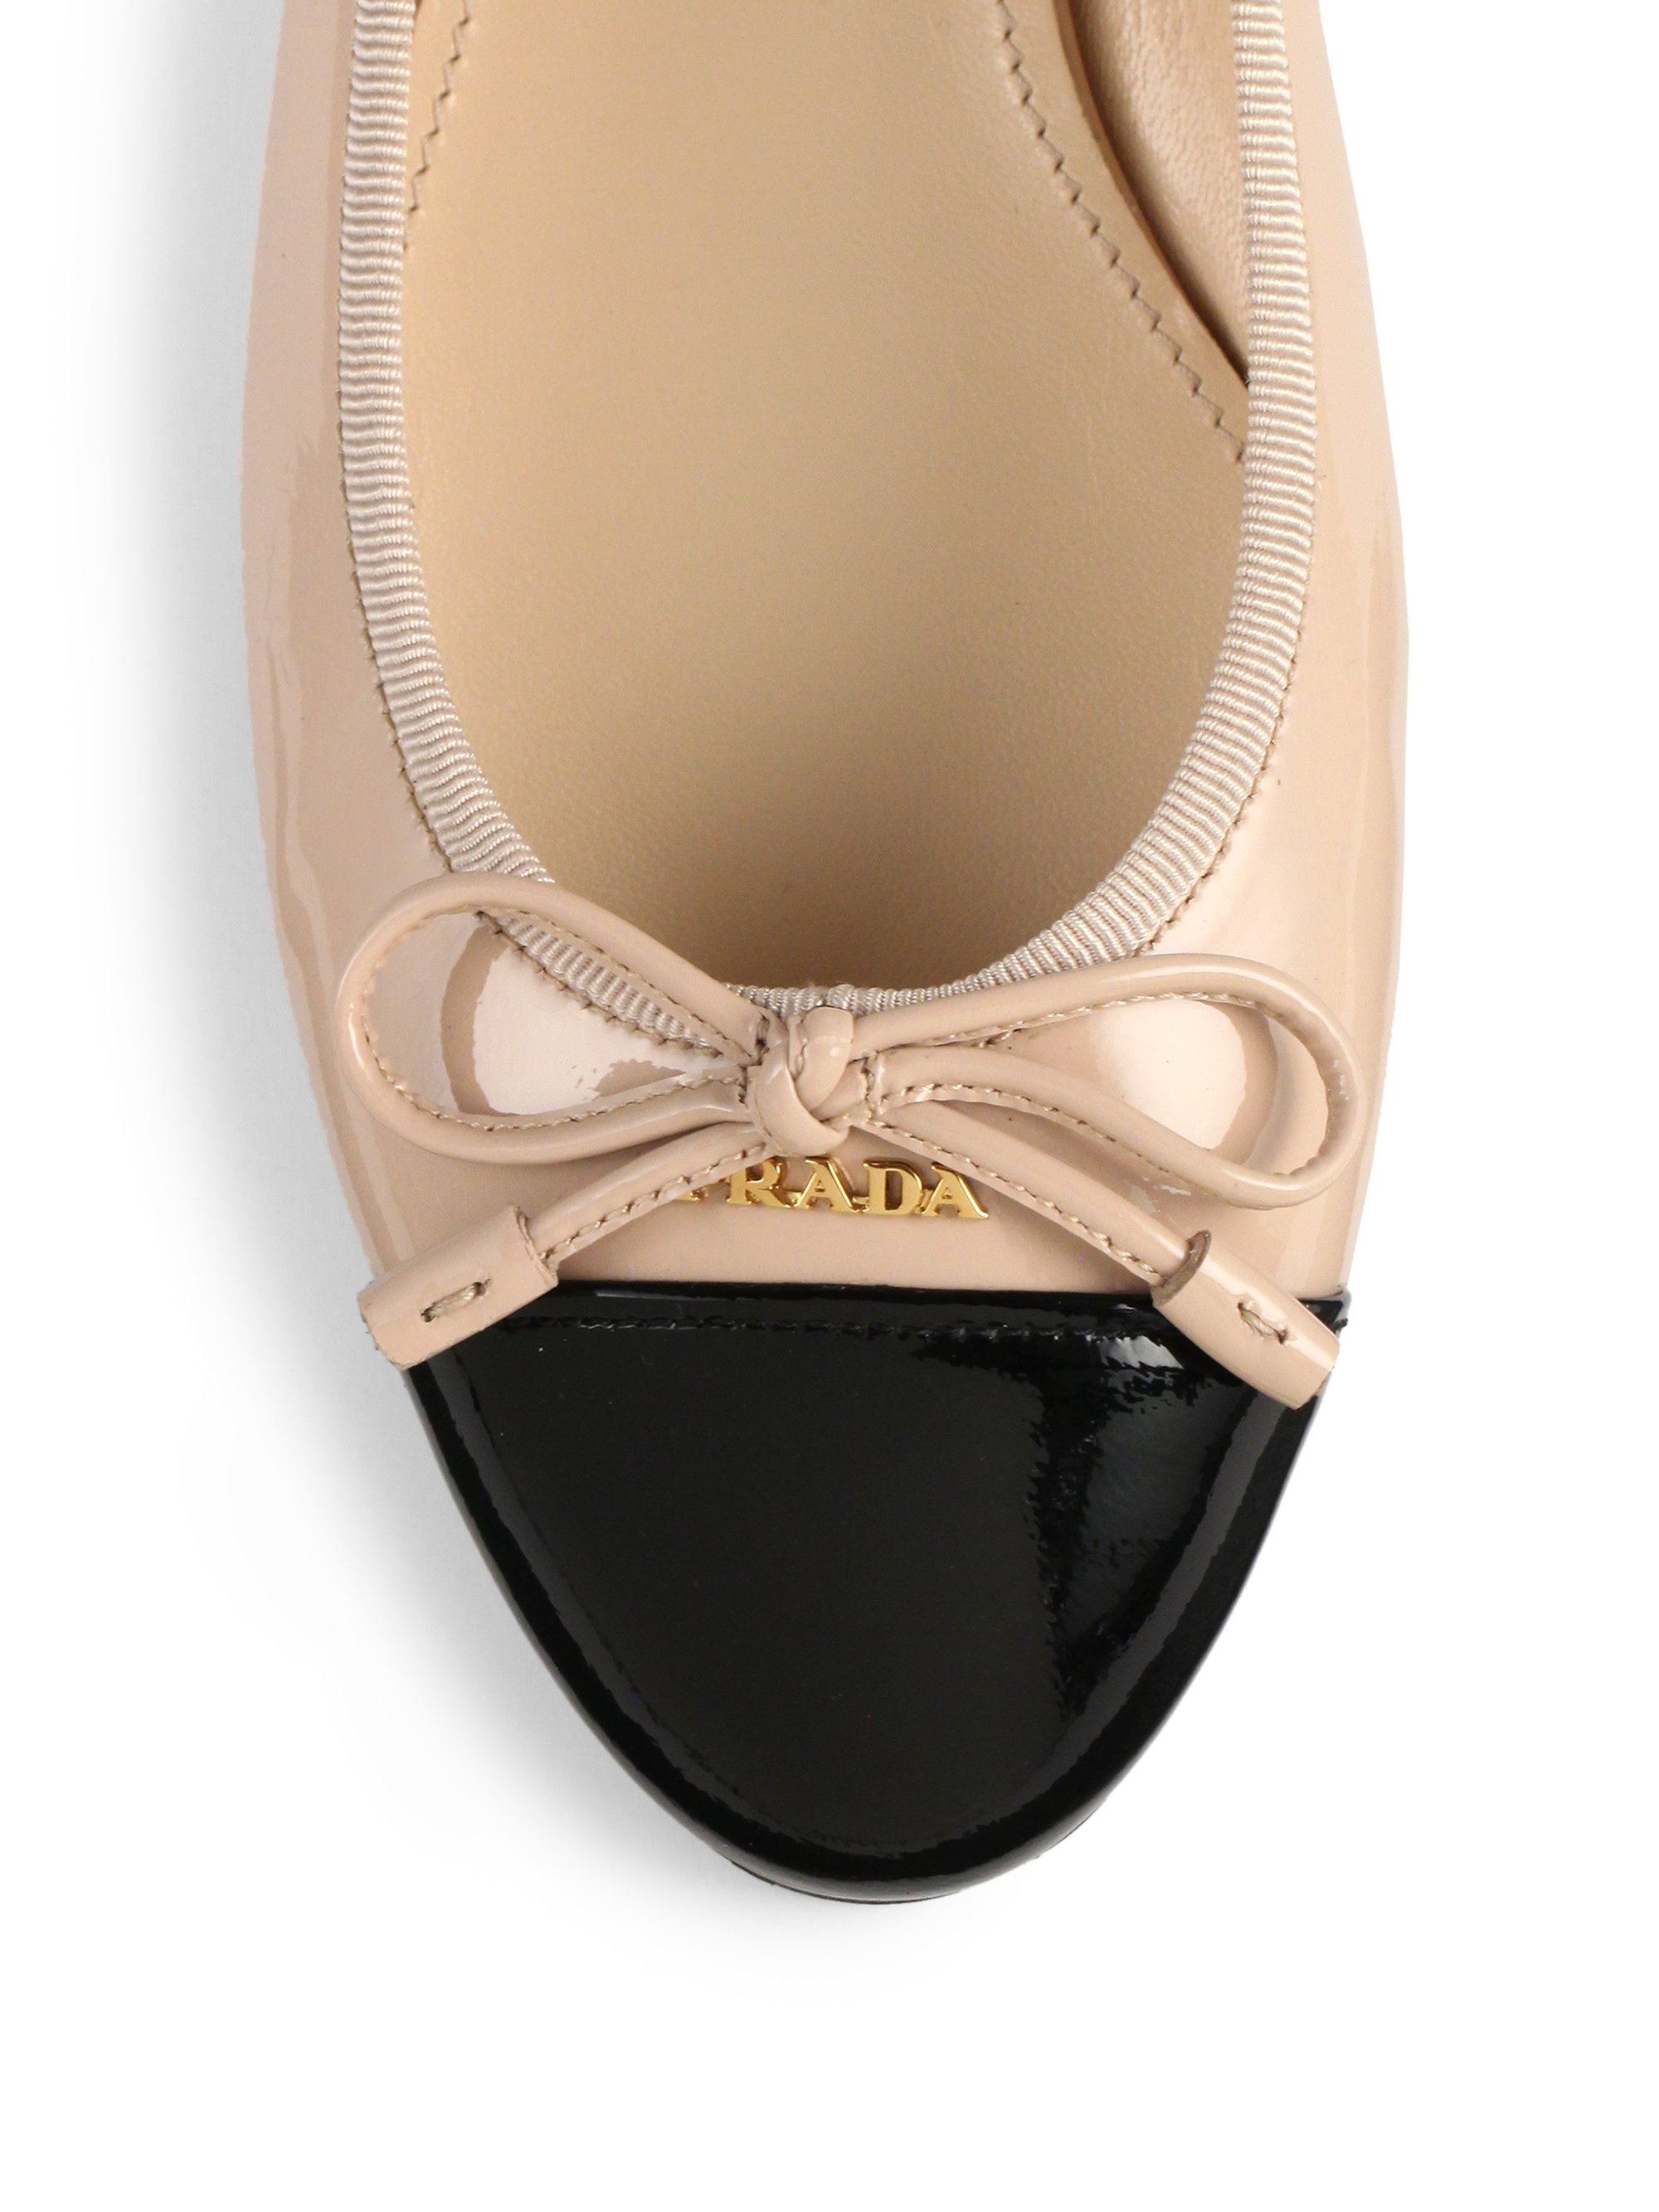 prada patent leather ballet flats,Up To OFF 68%